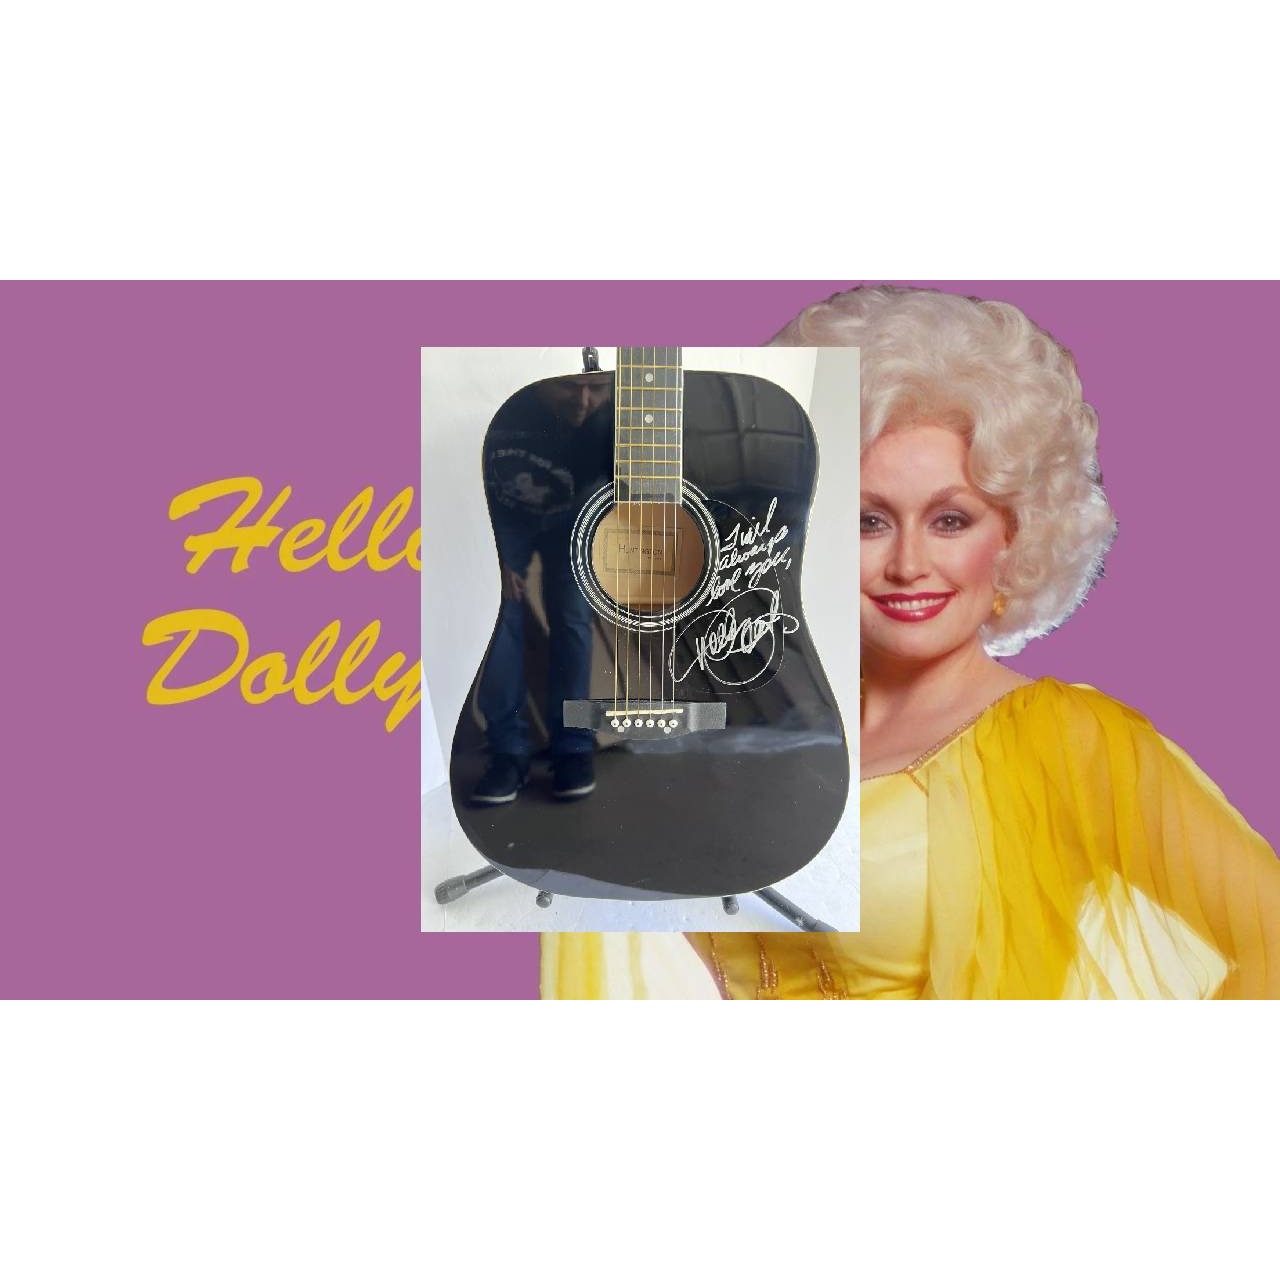 Dolly Parton full size Huntington acoustic guitar signed with proof